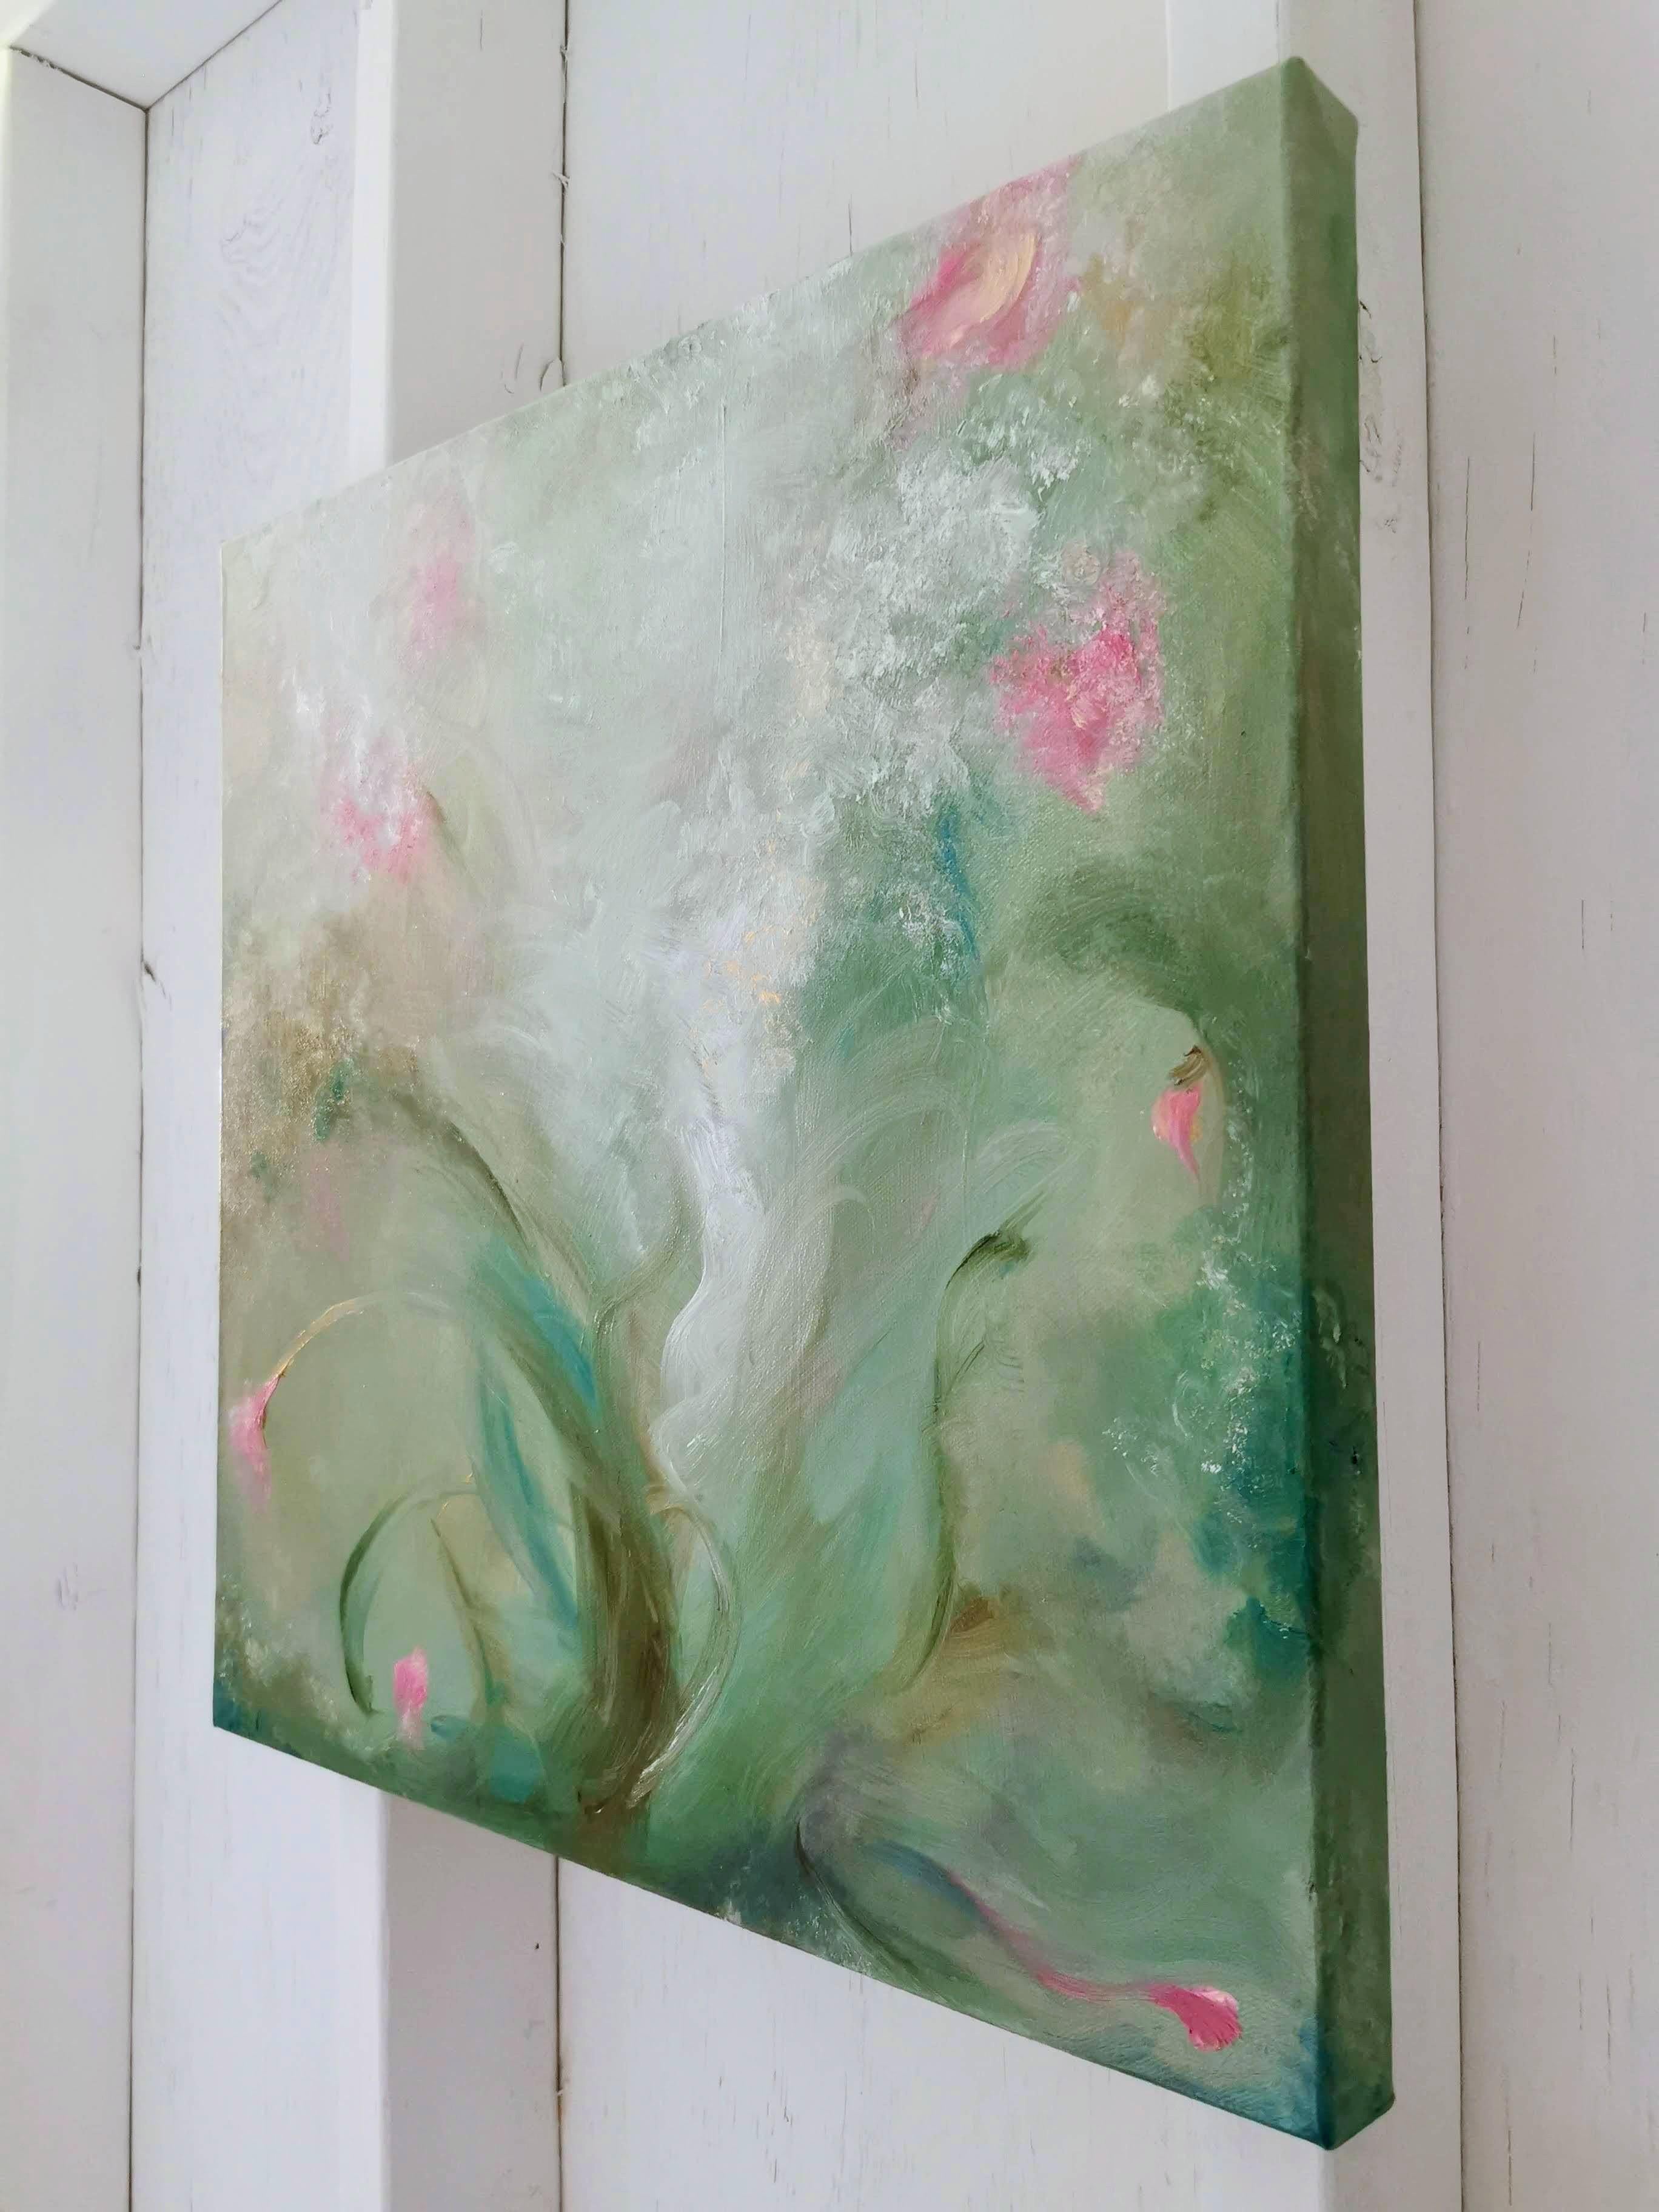 A most verdant spring - Whimsical green and pink abstract painting - Beige Abstract Painting by Jennifer L. Baker